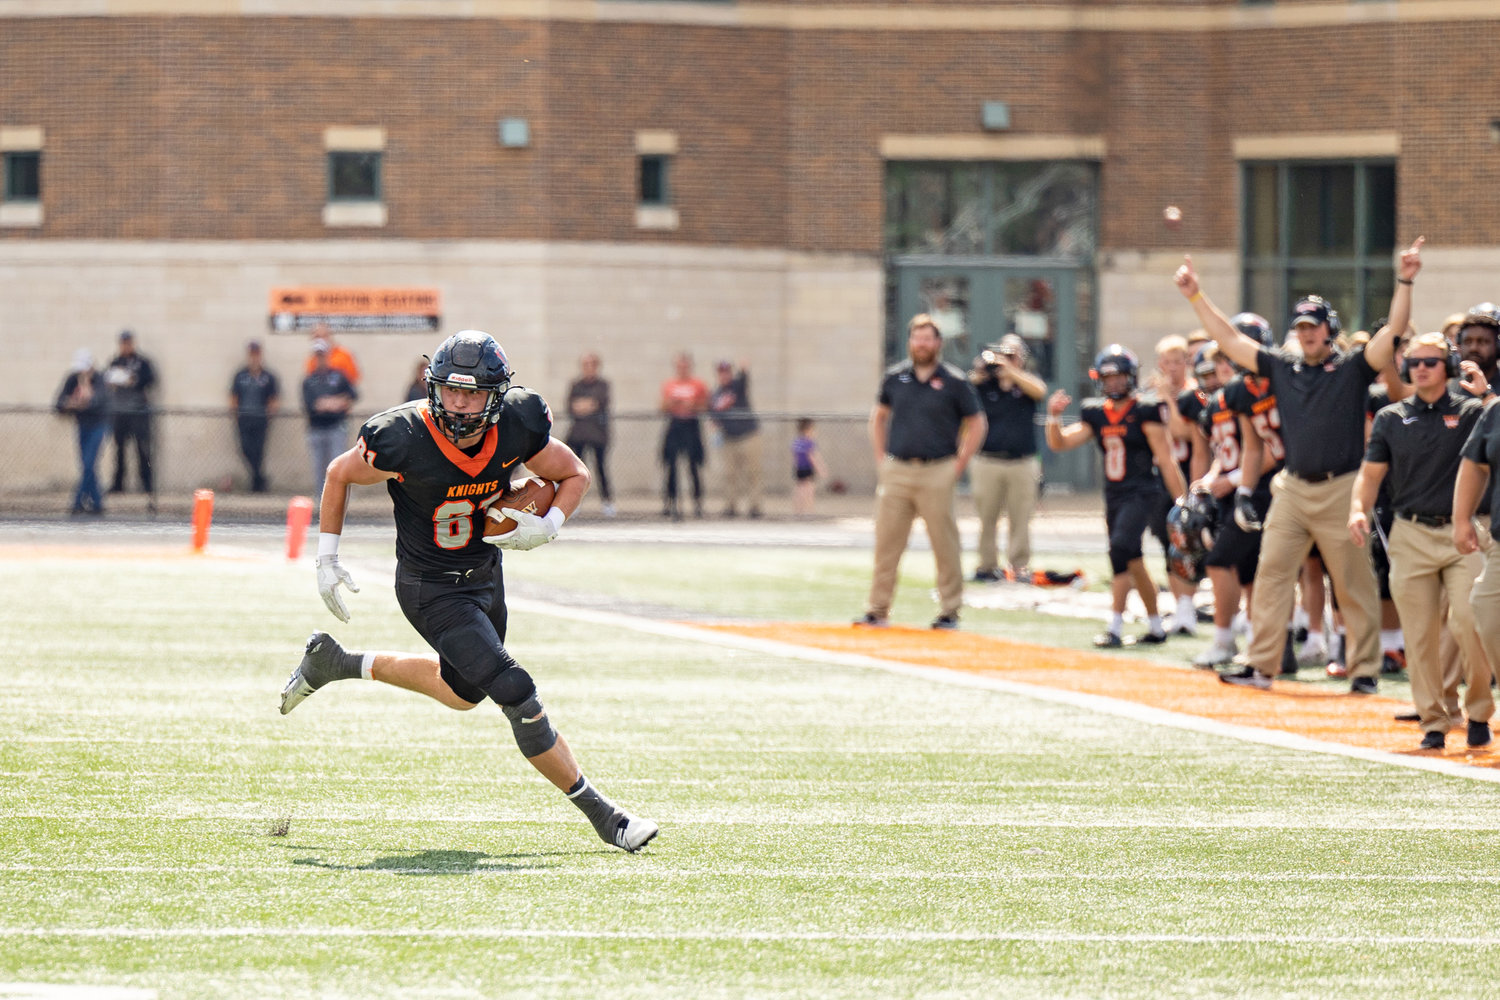 Wartburg senior tight end Tom Butters picks up yards after the catch.